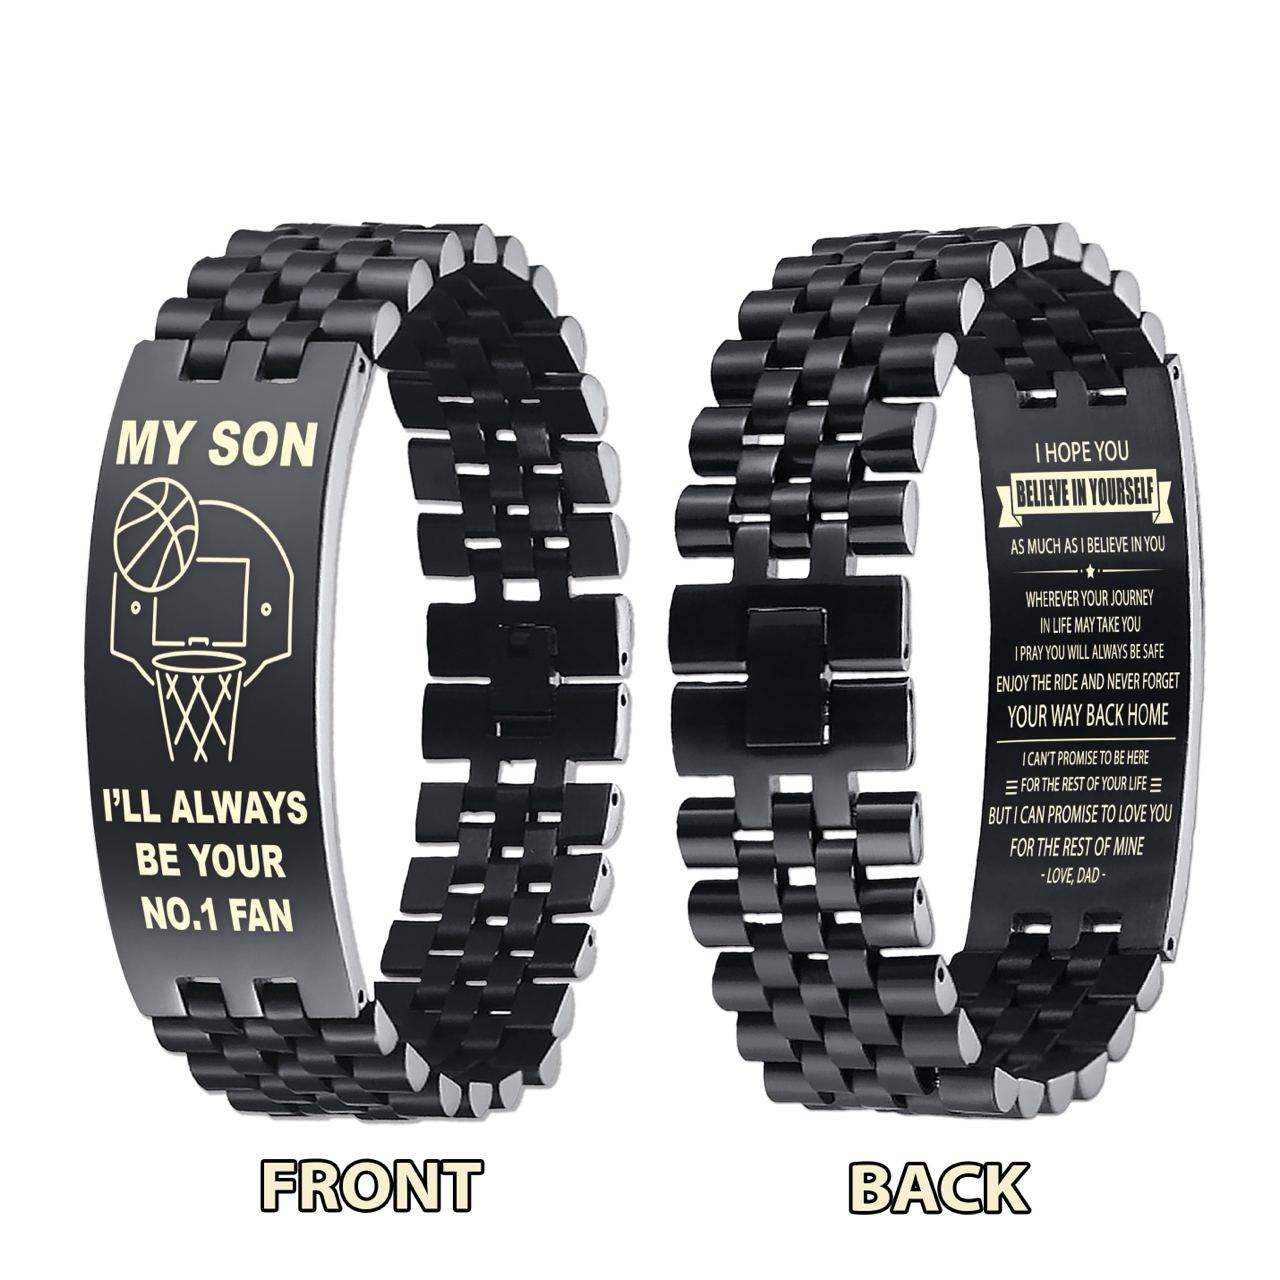 DS6 Customizable basketball bracelet, gifts from dad mom to son- I hope you believe in yourself